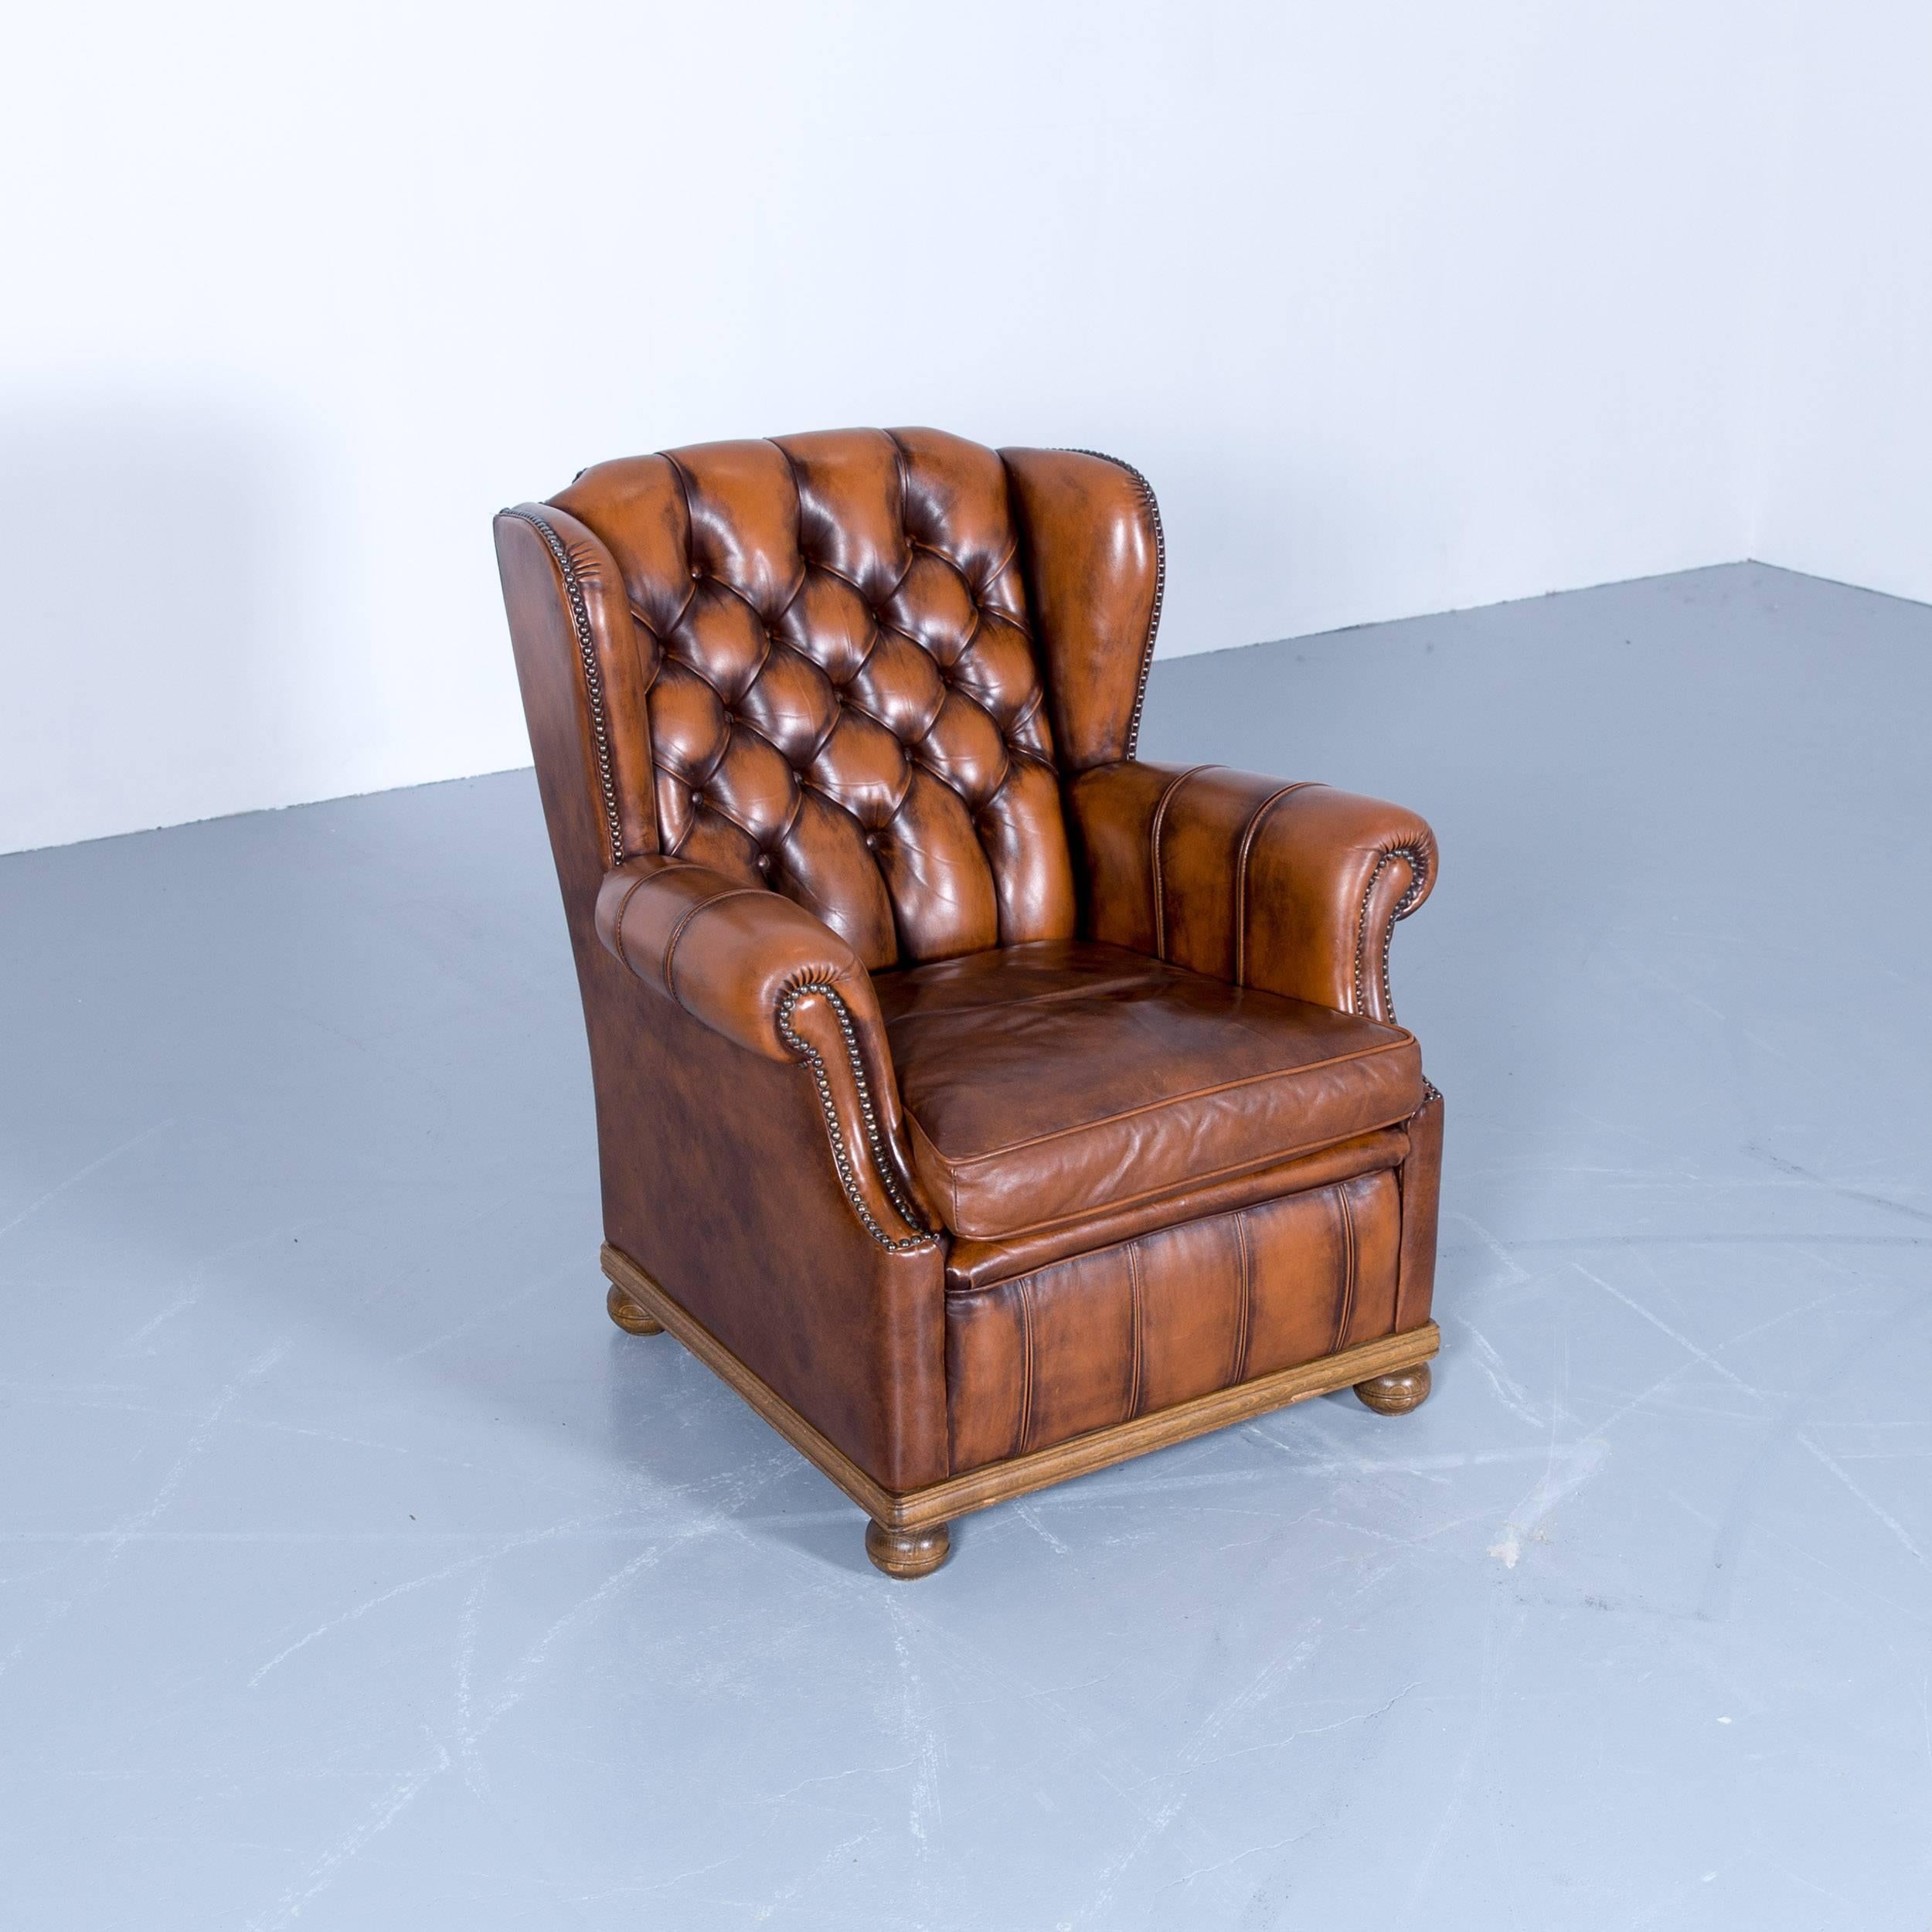 British Chesterfield Armchair Leather Brown One Seat Couch Retro Vintage Rivets